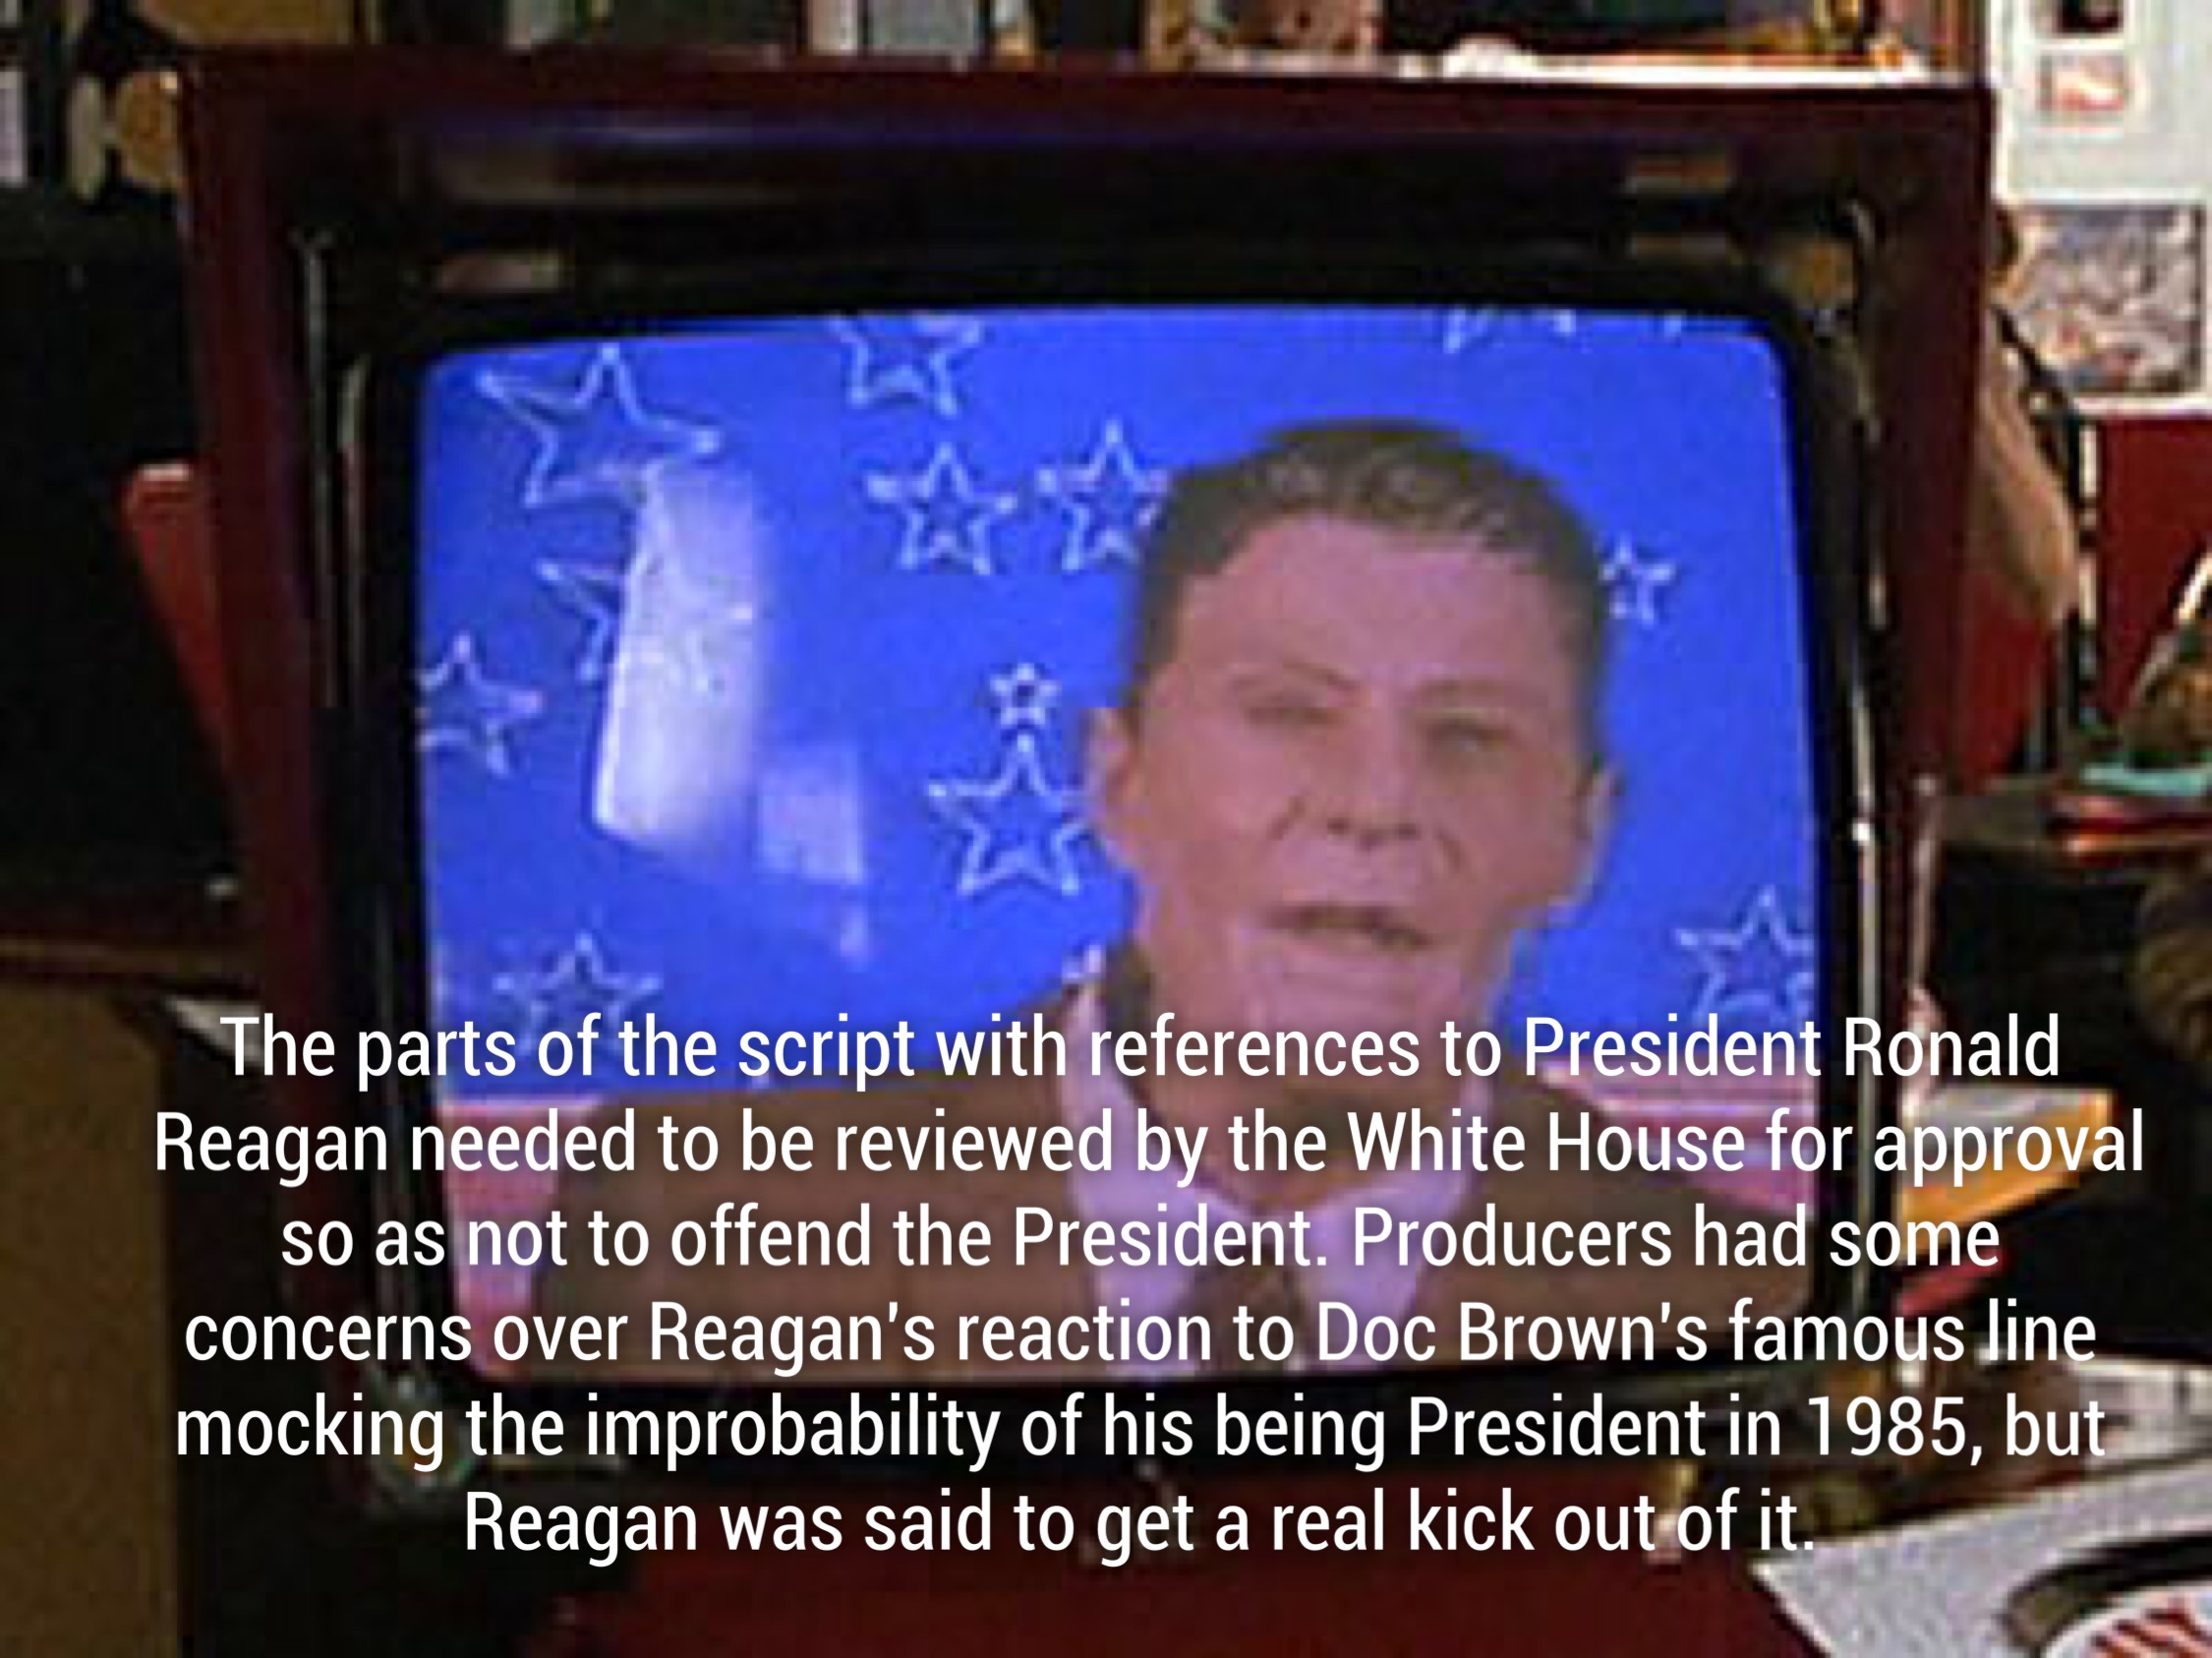 bttf ronald reagan - The parts of the script with references to President Ronald Reagan needed to be reviewed by the White House for approval so as not to offend the President. Producers had some concerns over Reagan's reaction to Doc Brown's famous line 